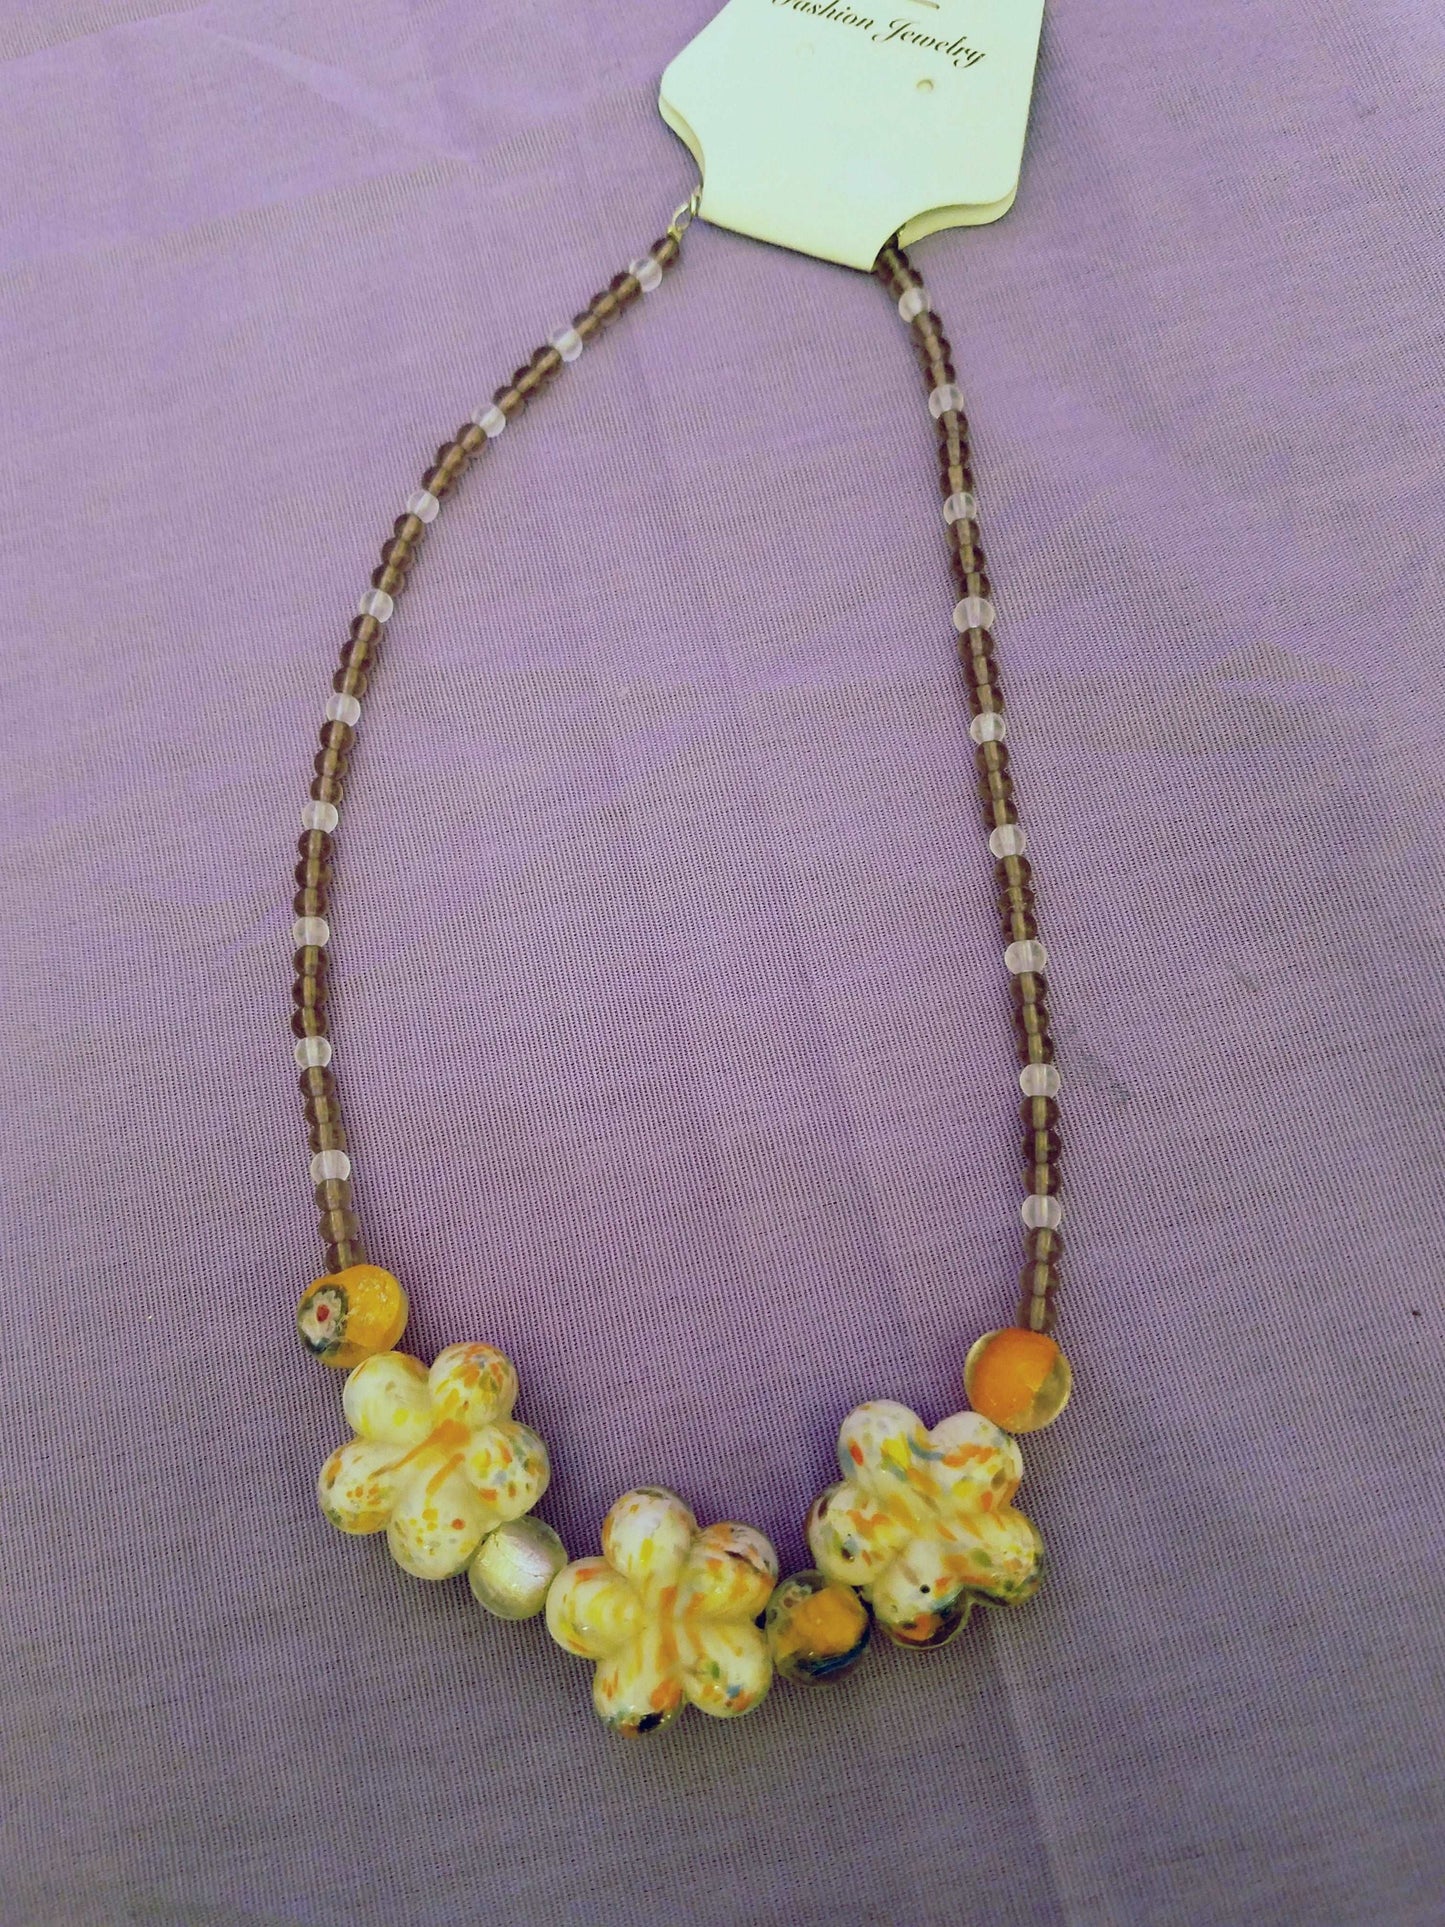 Pressed / Lampworked Necklace